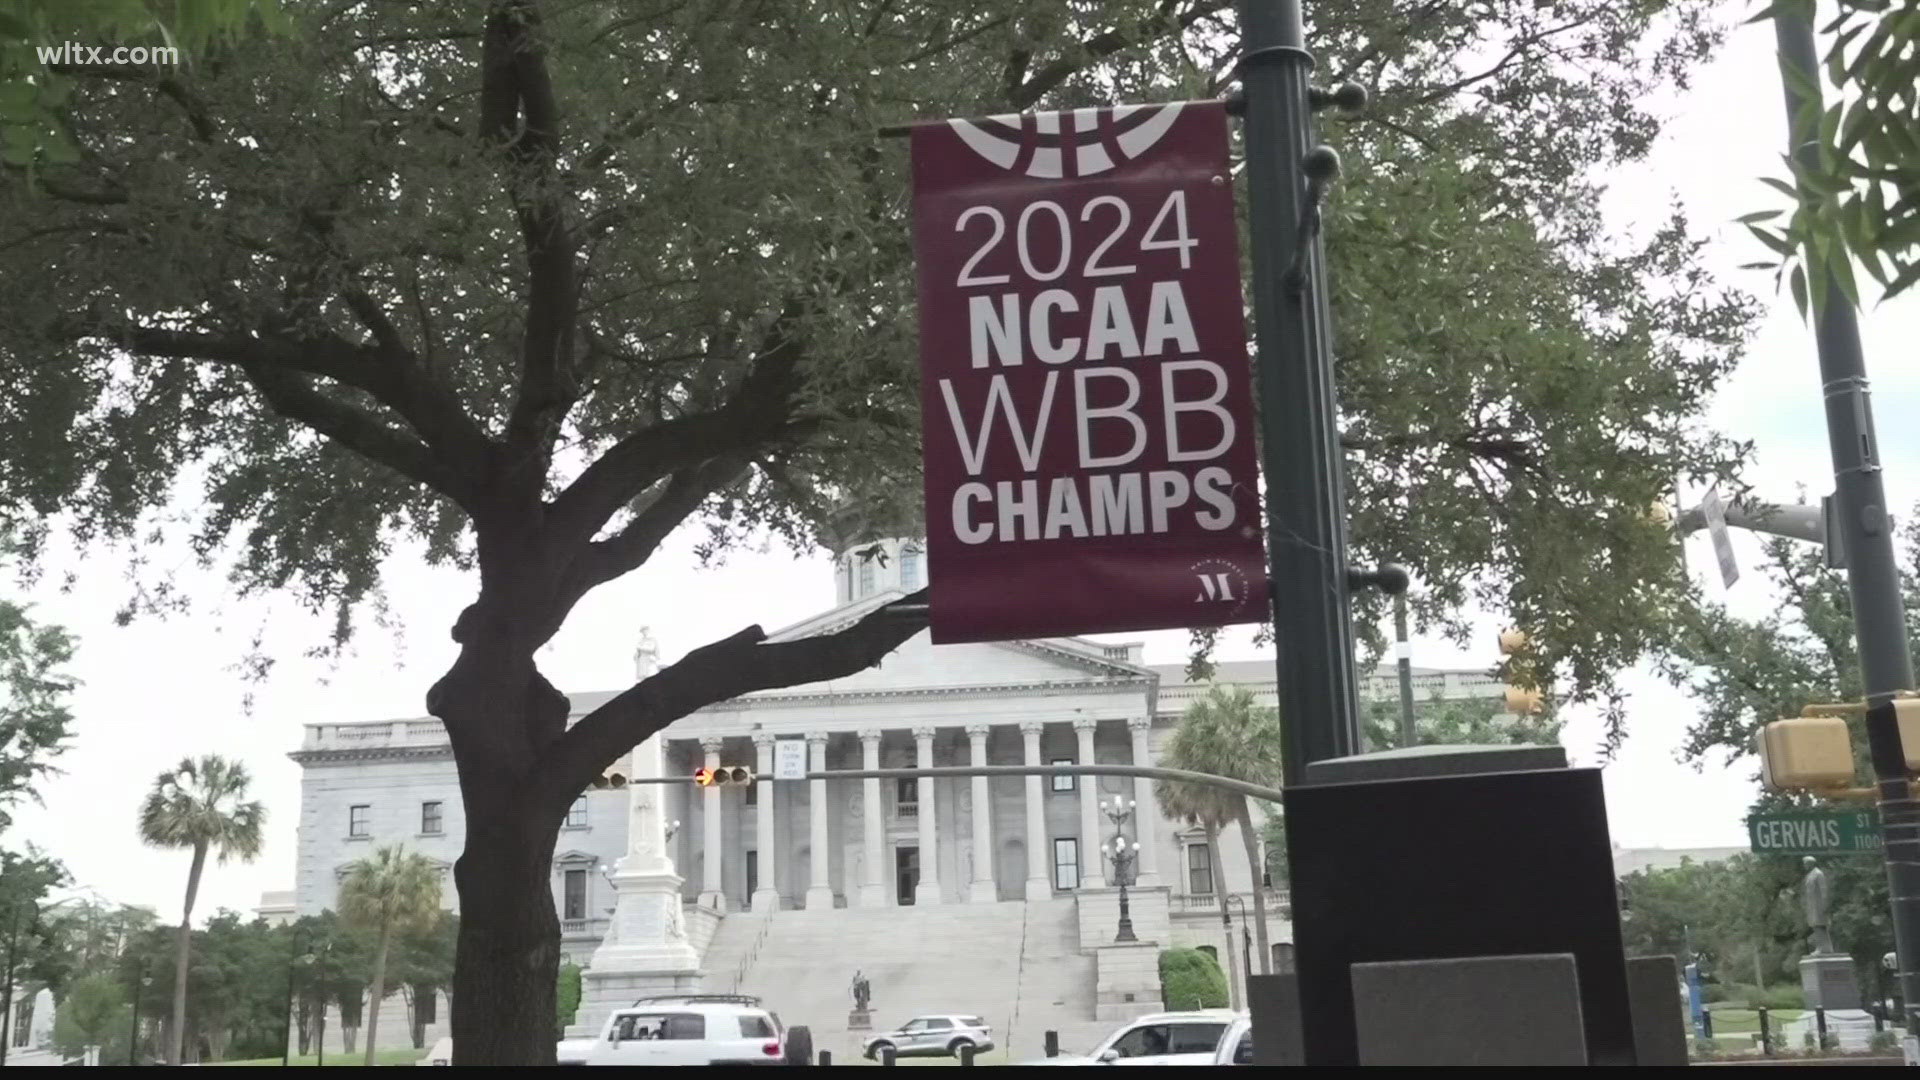 Jamie Jennings, 46, was arrested for stealing the USC NCAA women's basketball championship banners on Main street.